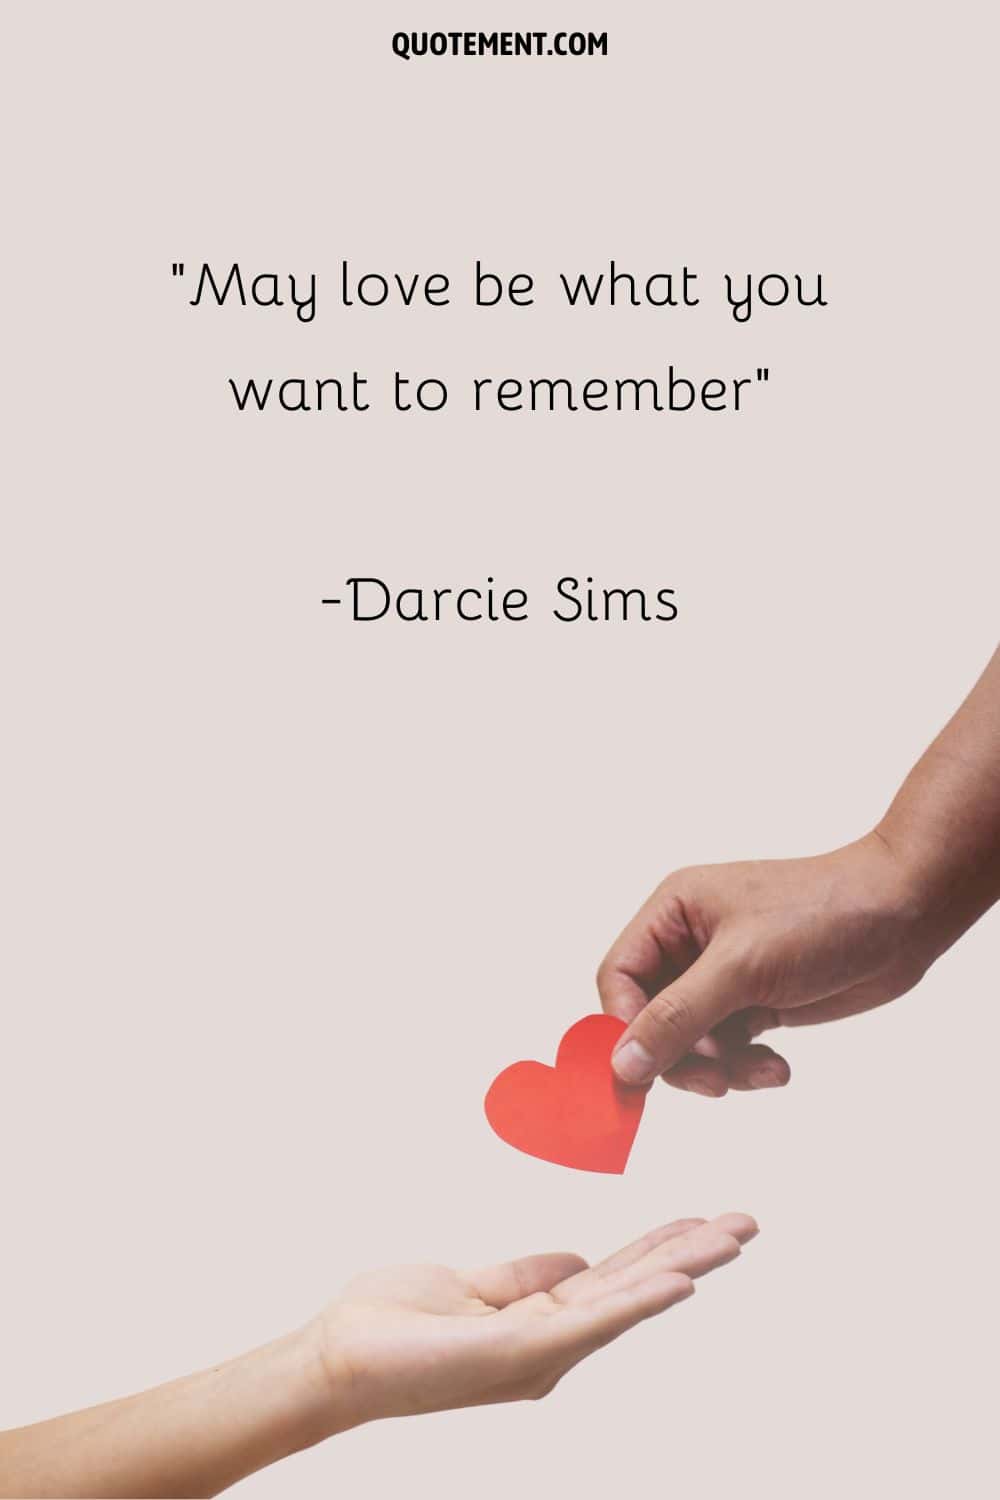 May love be what you want to remember